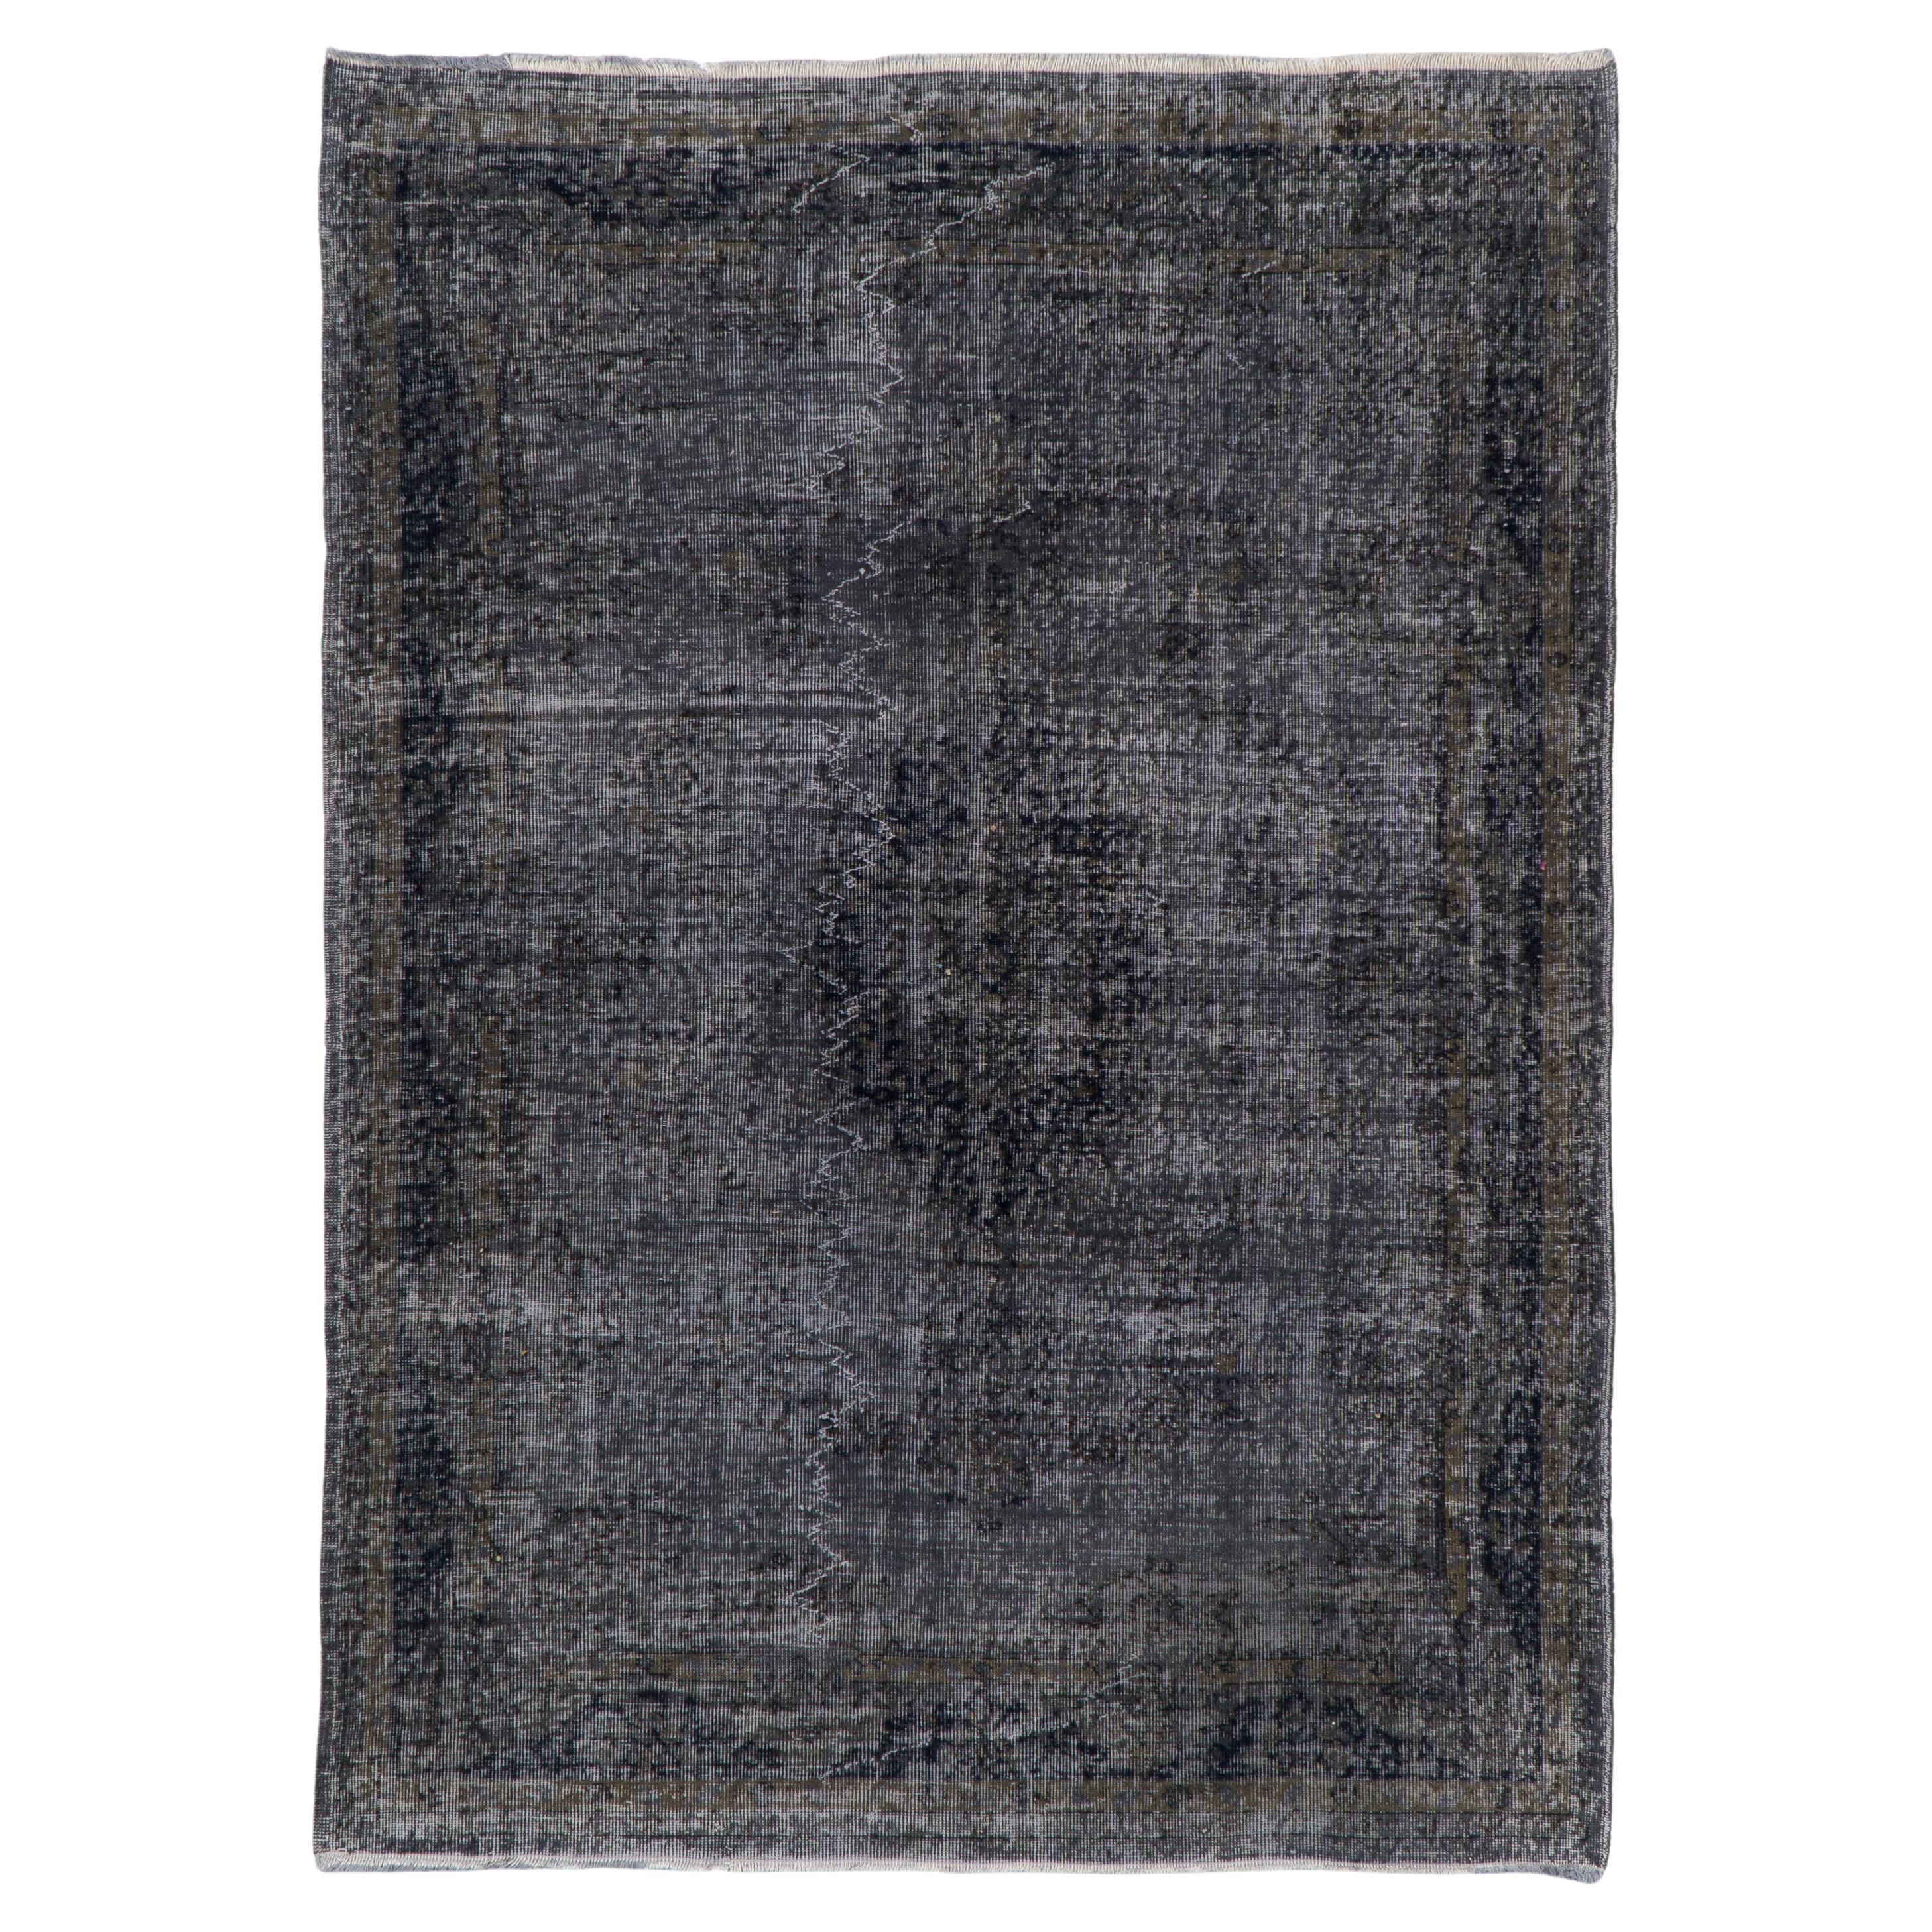 5.8x8 ft Handmade 1950s Area Rug in Dark Gray. Great for Contemporary Interiors For Sale